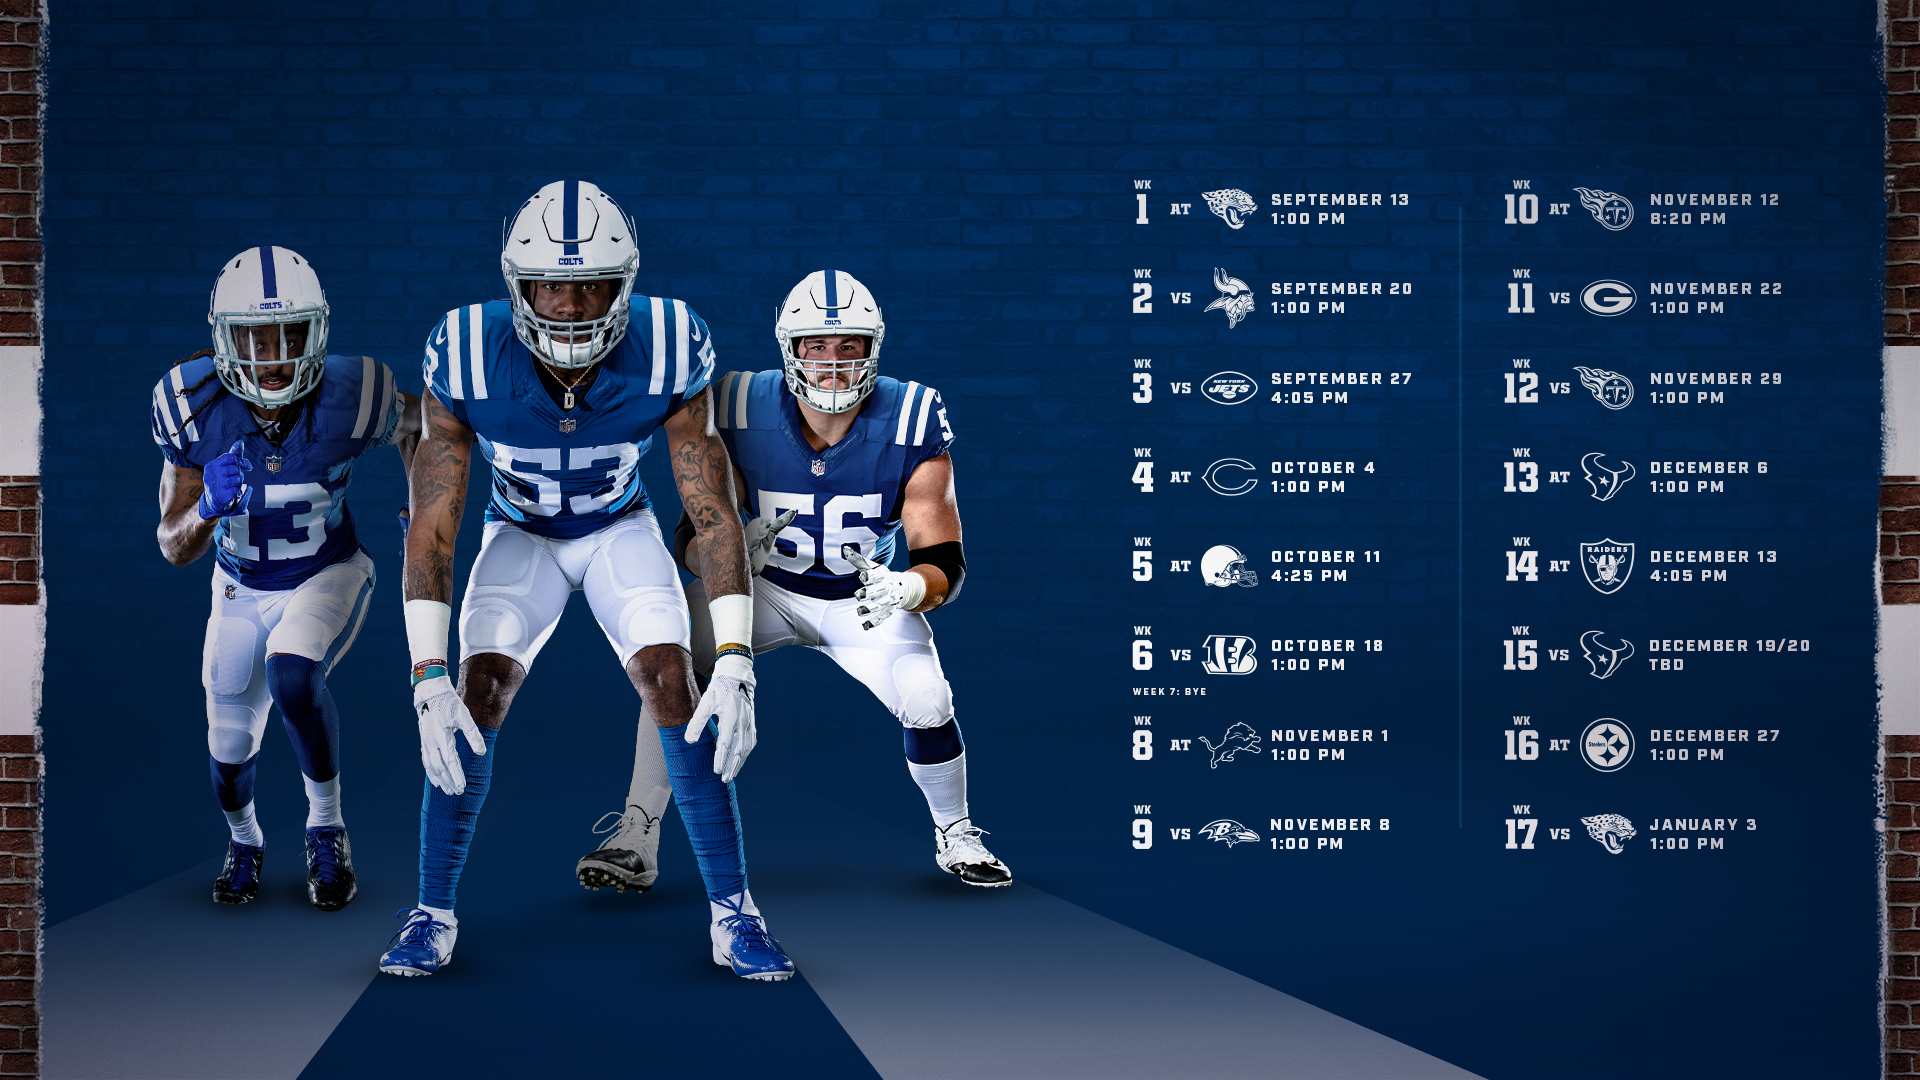 Free Download Colts Schedule Indianapolis Colts Coltscom 1920x1080 For Your Desktop Mobile Tablet Explore 37 Indianapolis Colts 2020 Wallpapers Indianapolis Colts Wallpapers Indianapolis Colts Wallpaper Indianapolis Colts Wallpaper Desktop